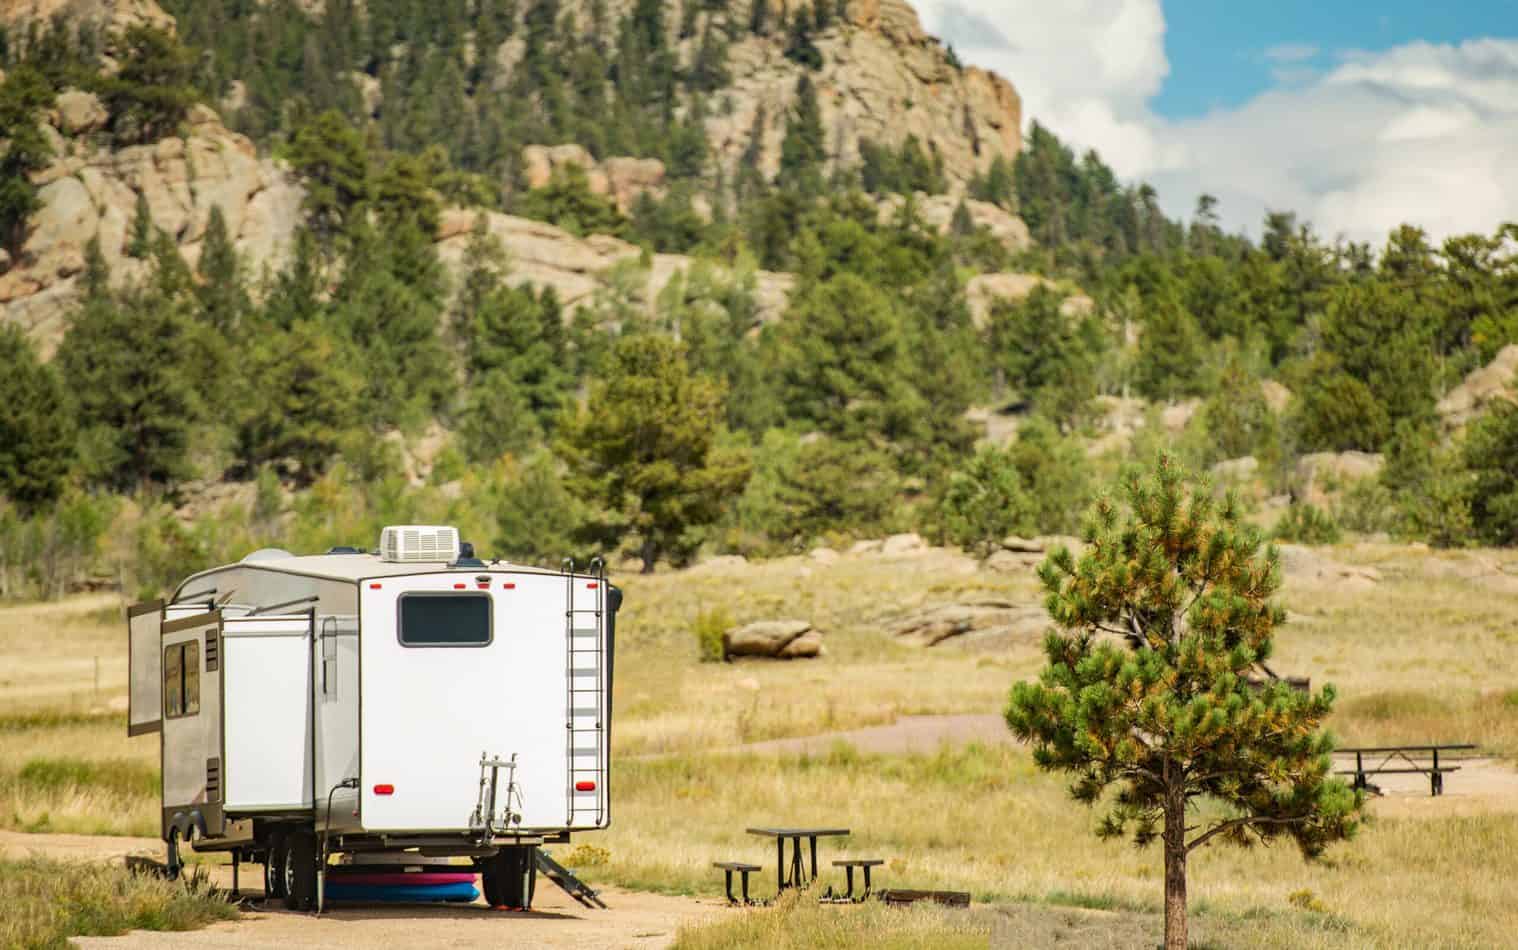 A fifth wheel RV parked in a field with a mountain in the background